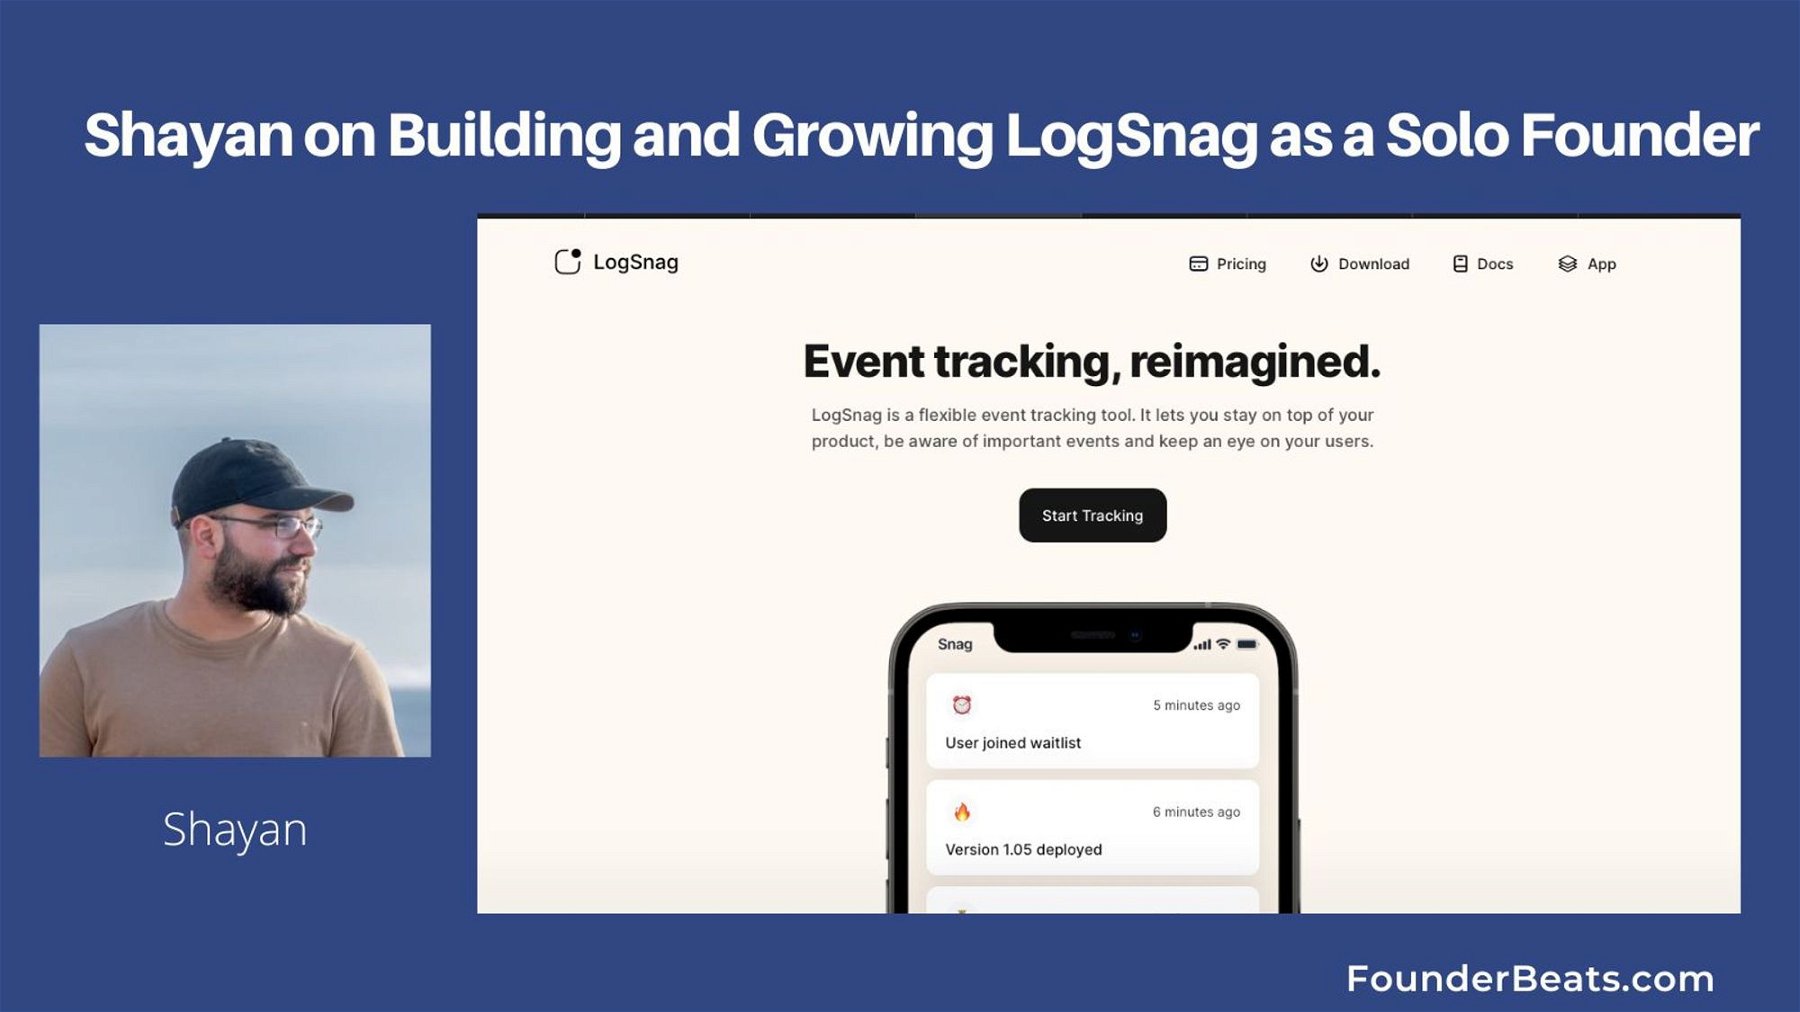 Shayan on Building and Growing LogSnag as a Solo Founder